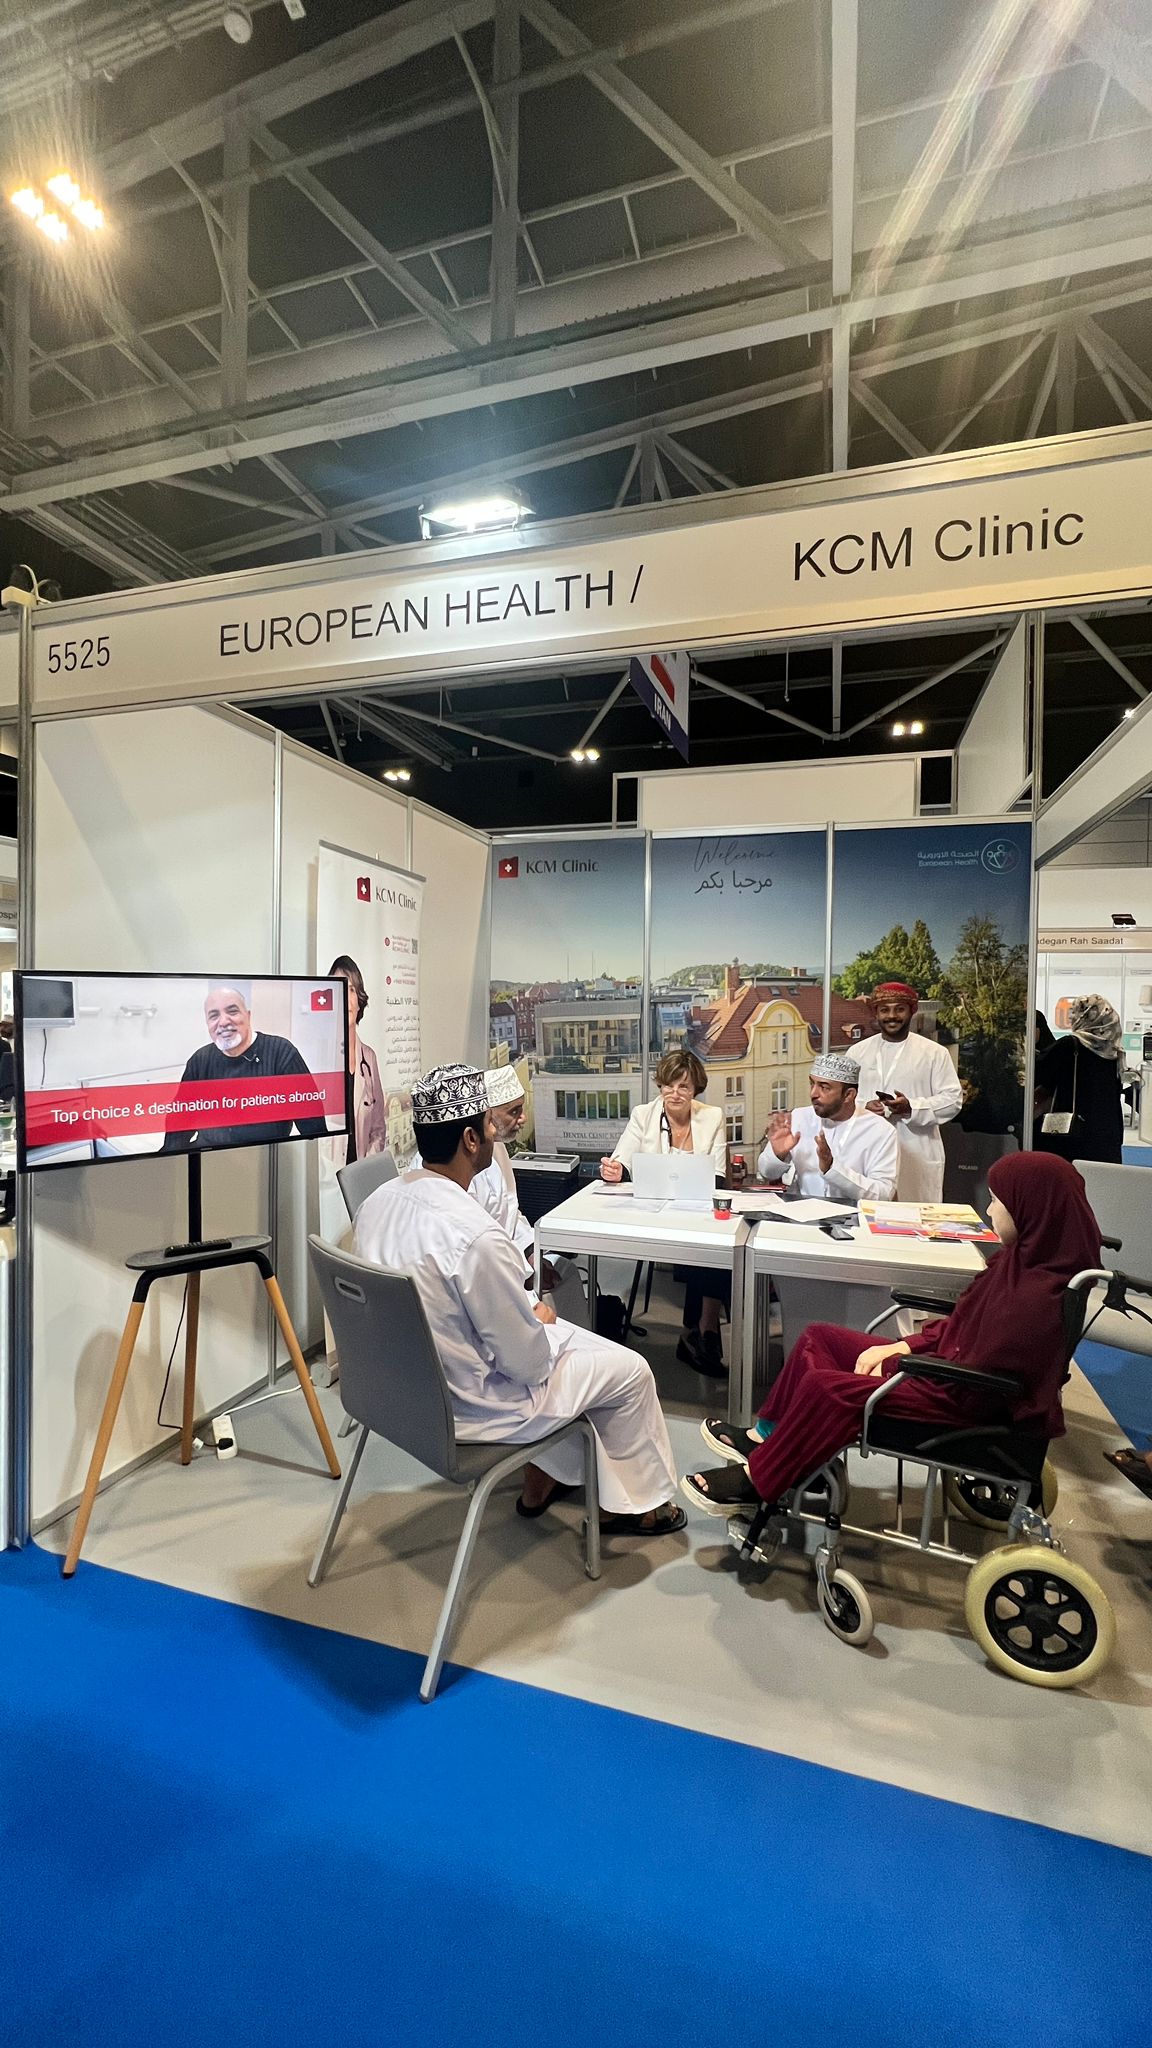 KCM Clinic Shines at Oman Health Exhibition & Conference, Muscat (Oman)